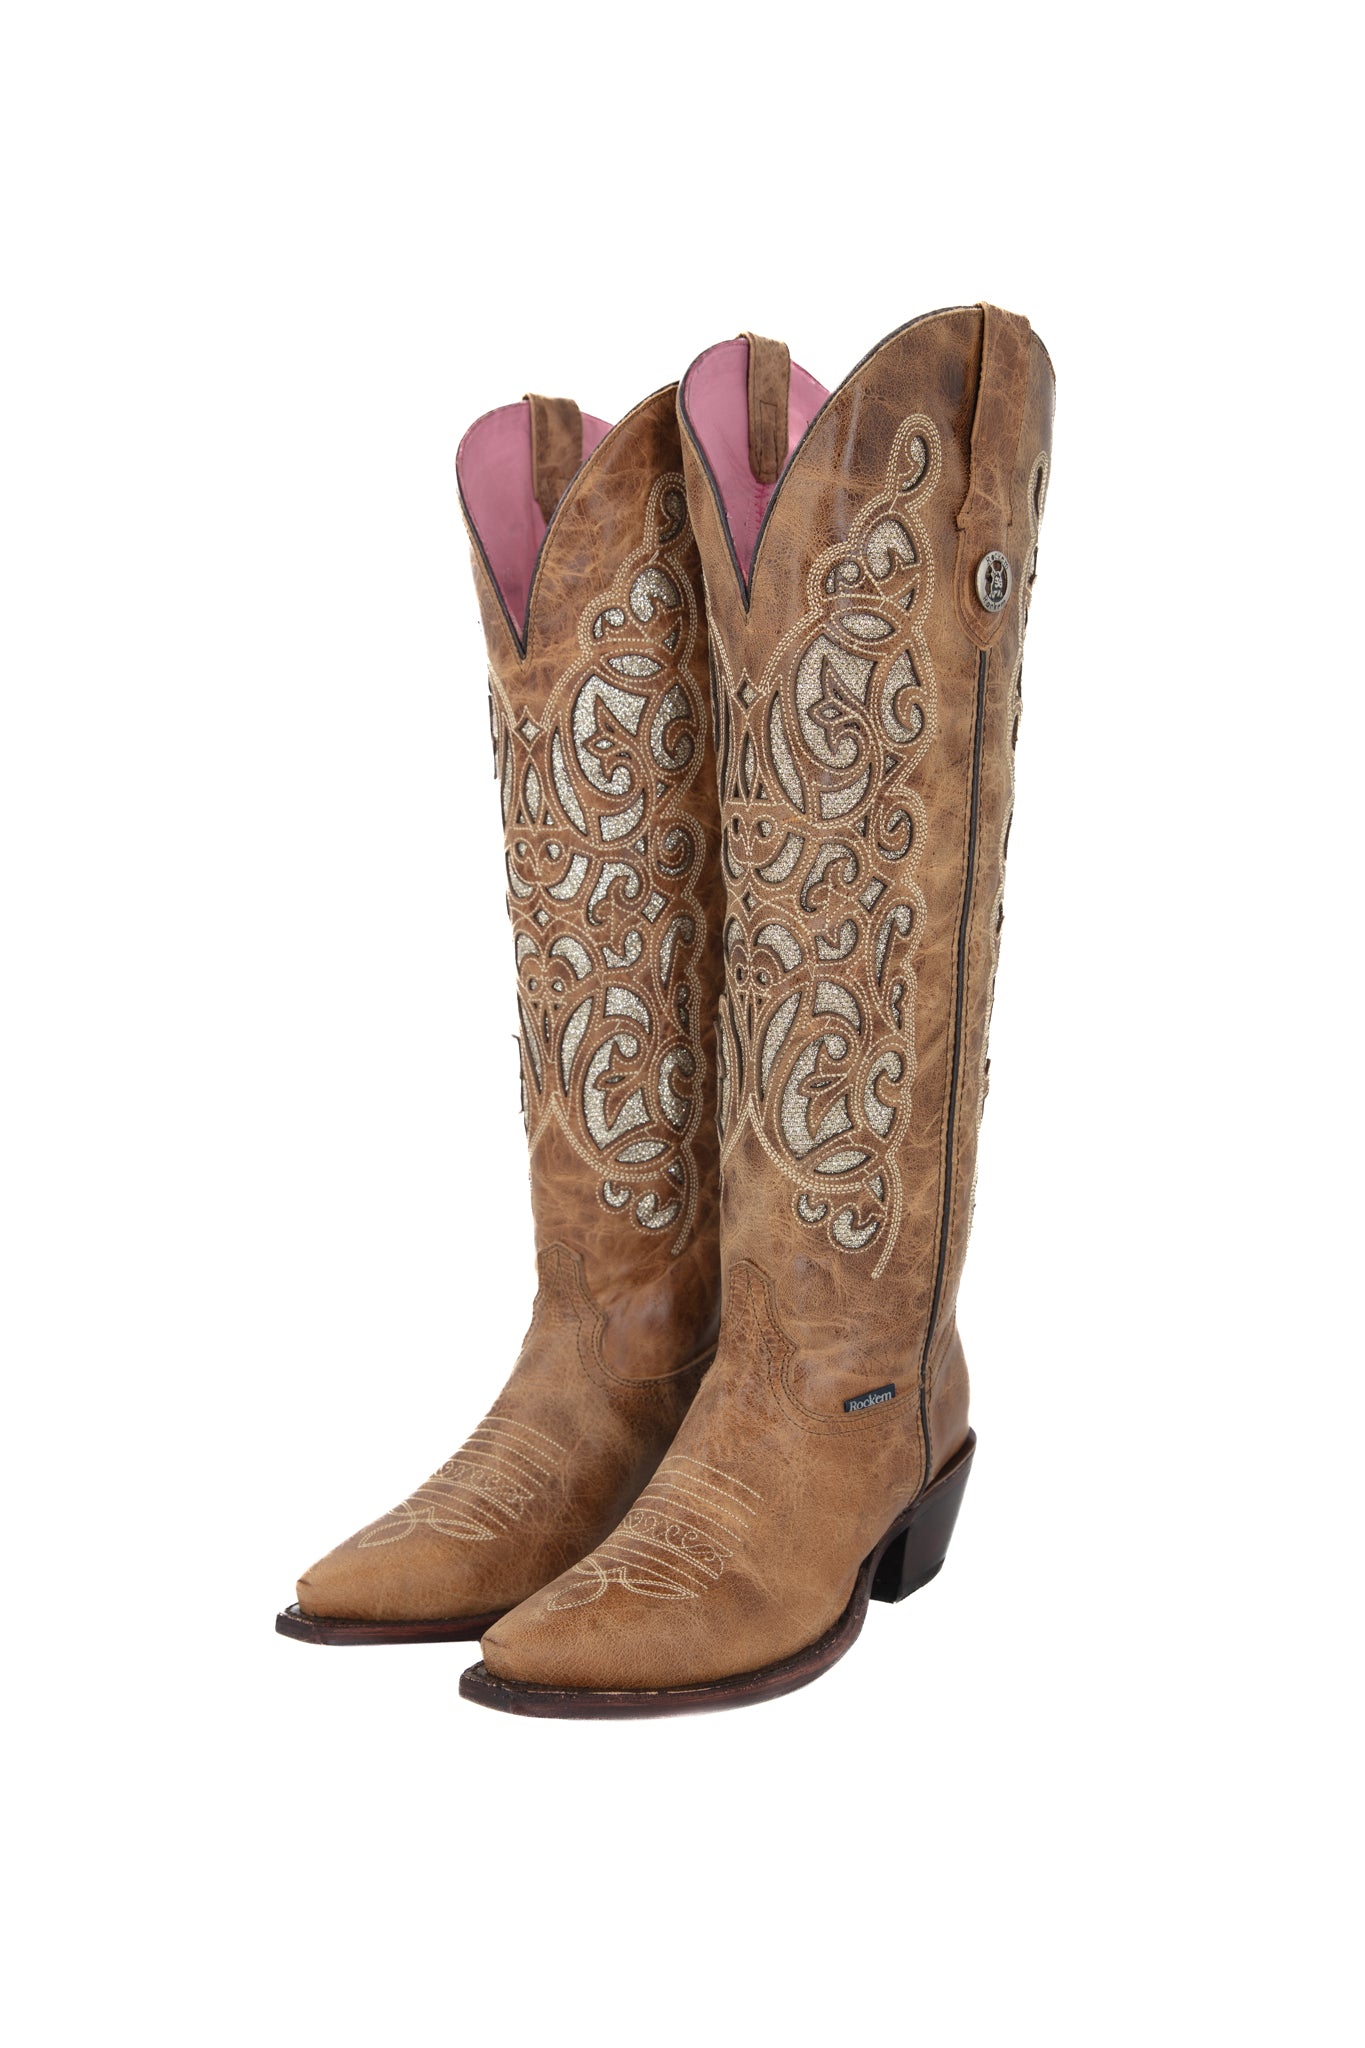 Claudia Con Ringle Olden Tan Tall Point Toe Cowgirl Boot